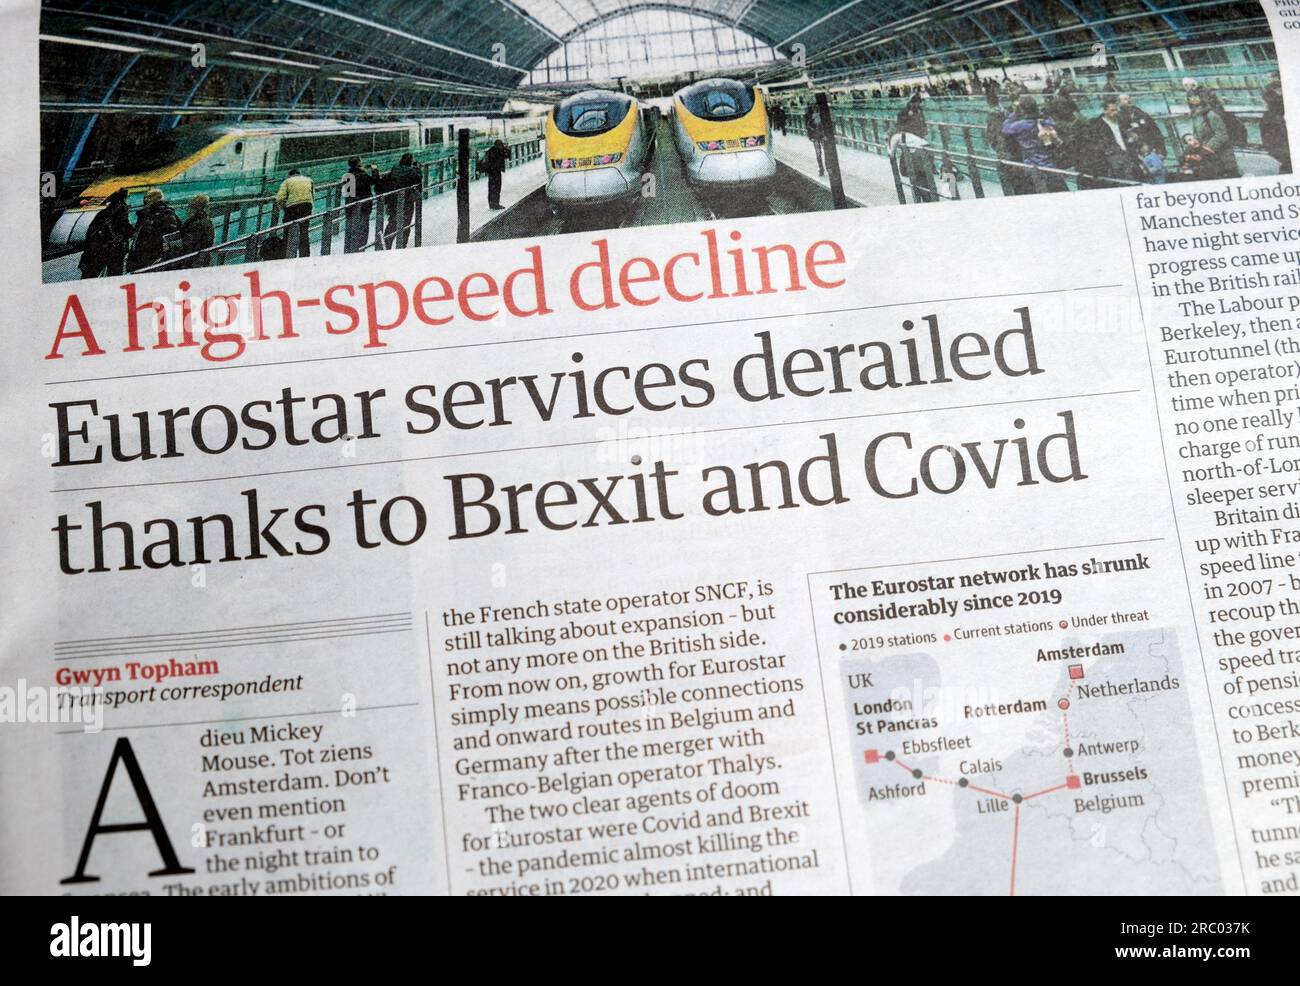 'Eurostar services derailed thanks to Brexit and Covid' Guardian Business newspaper headline high-speed decline transportation 24 June 2023 London UK Stock Photo